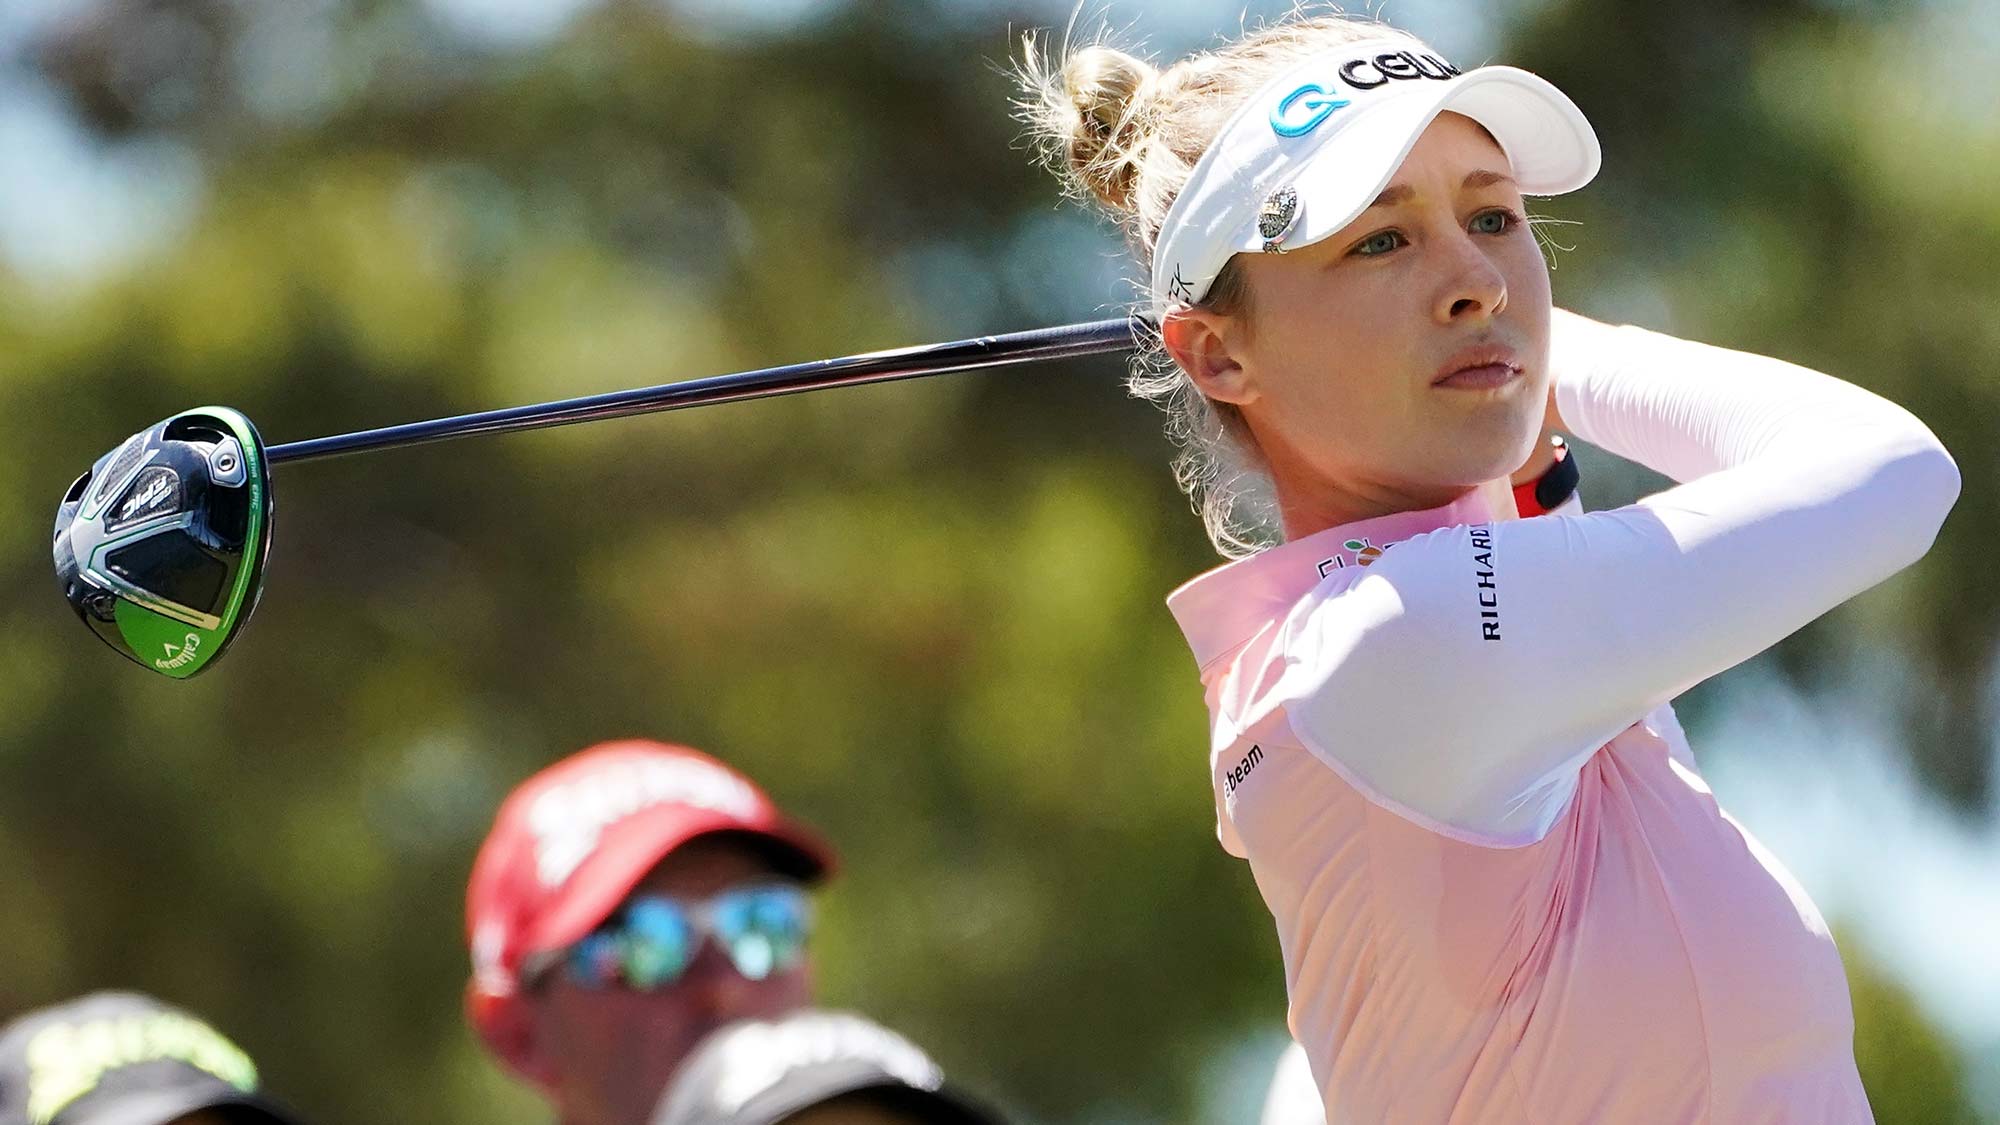 Nelly Korda of the United States plays a shot during day three of the 2019 ISPS Handa Women's Australian Open